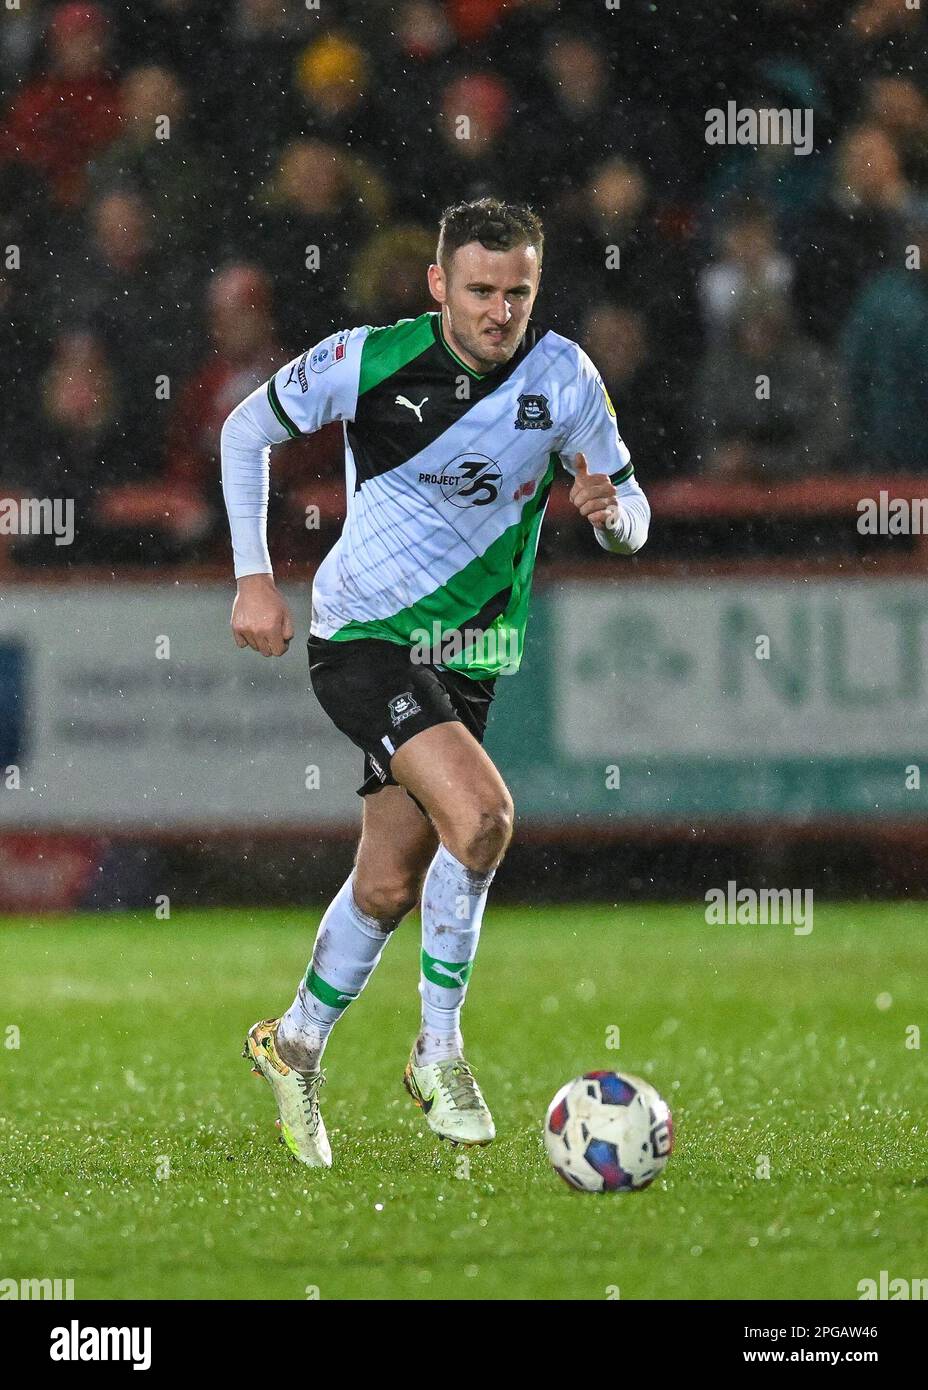 Macaulay Gillesphey #3 of Plymouth Argyle on the ball during the Sky Bet League 1 match Accrington Stanley vs Plymouth Argyle at Wham Stadium, Accrington, United Kingdom, 21st March 2023  (Photo by Stan Kasala/News Images) Stock Photo